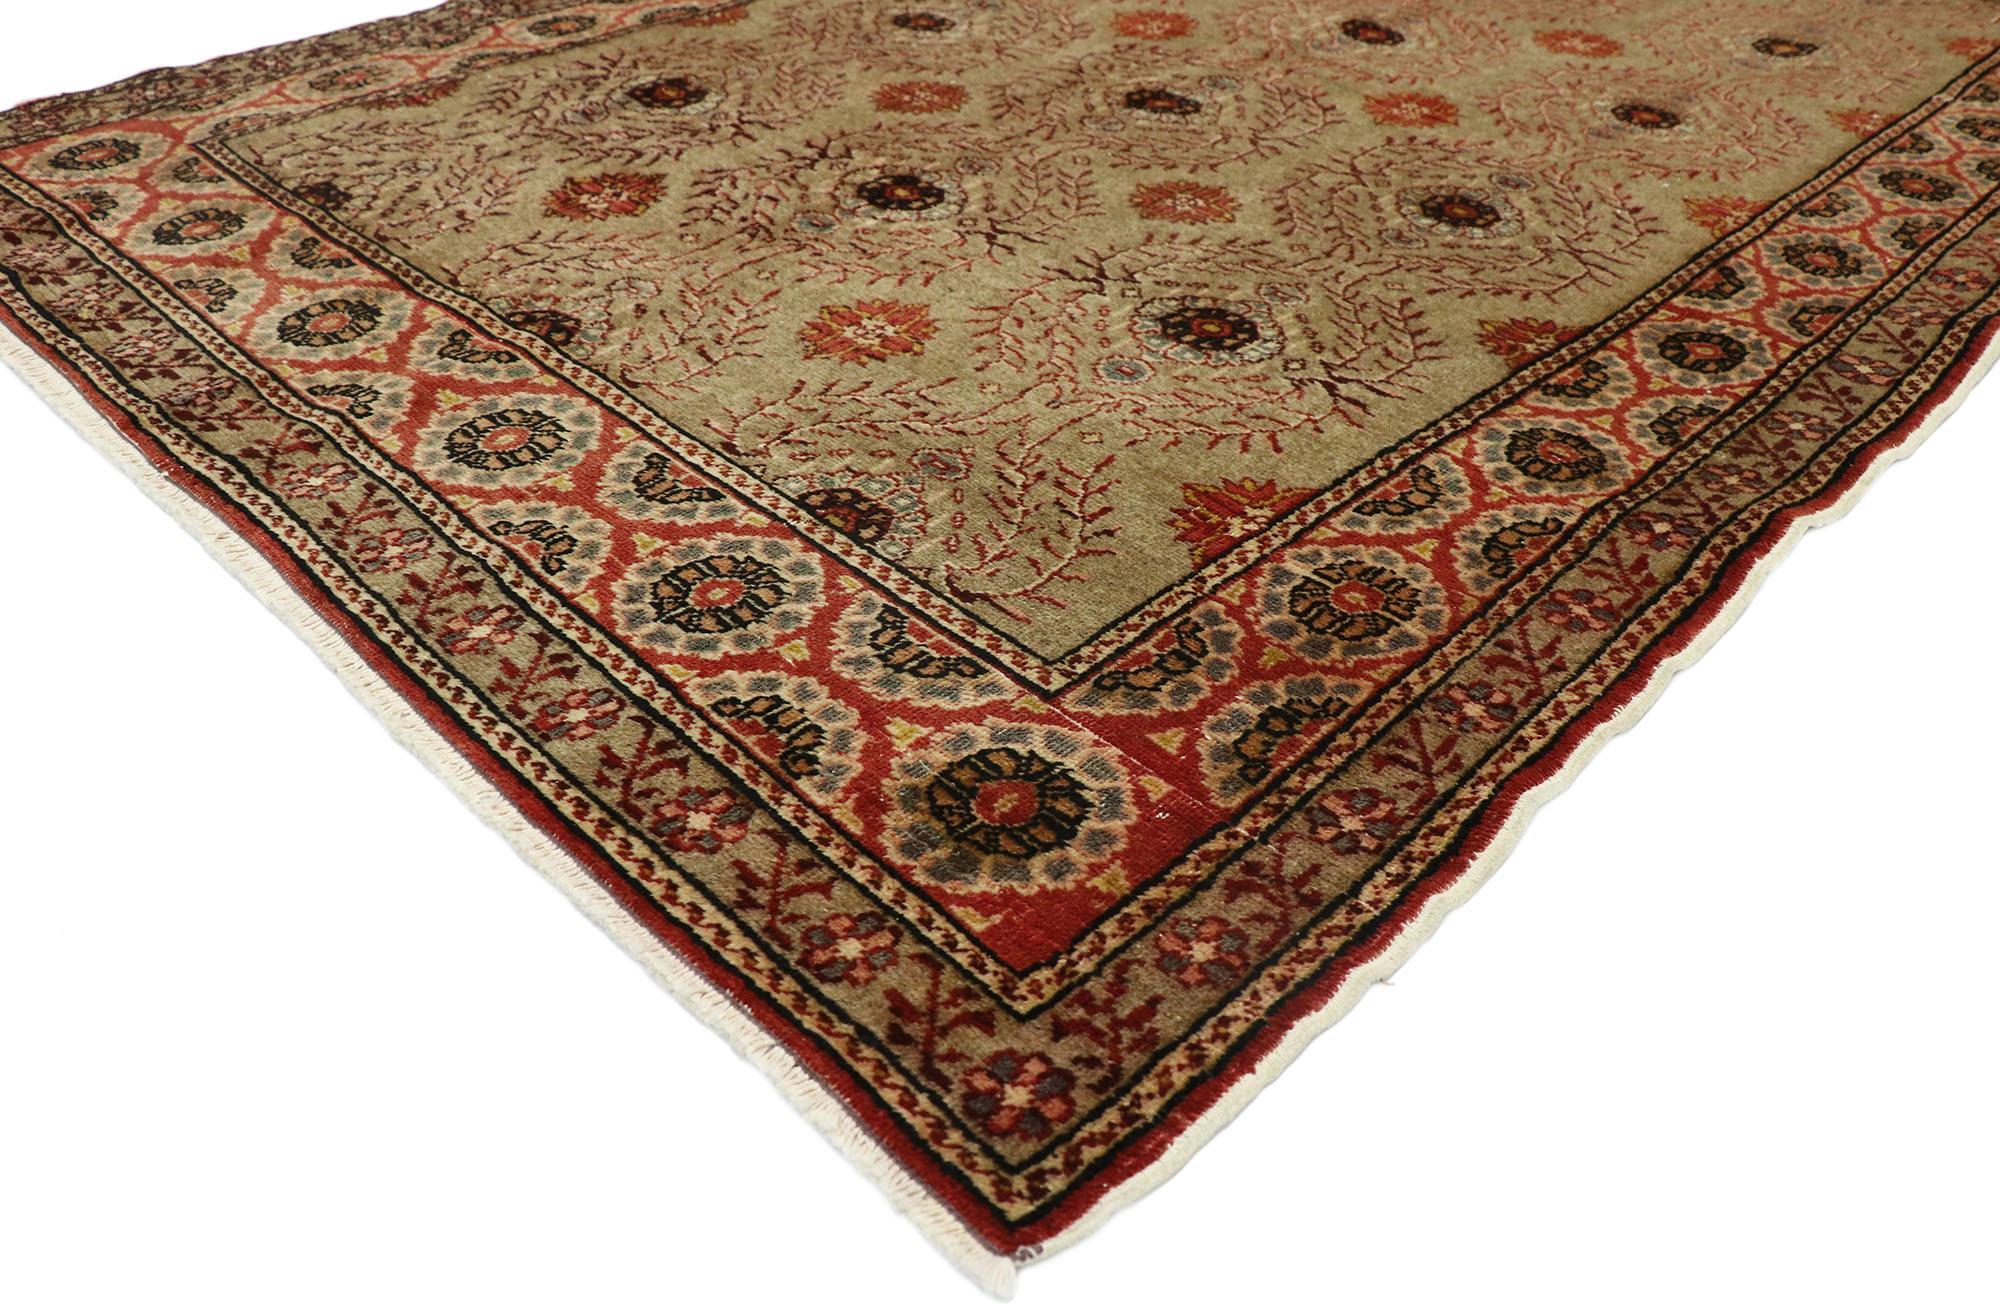 52774, distressed vintage Turkish Kayseri rug with rustic Artisan style 04'00 x 06'02. Traditional and neoclassical in its symmetry, this hand knotted wool distressed vintage Turkish Kayseri rug astounds with its beauty and well-balanced